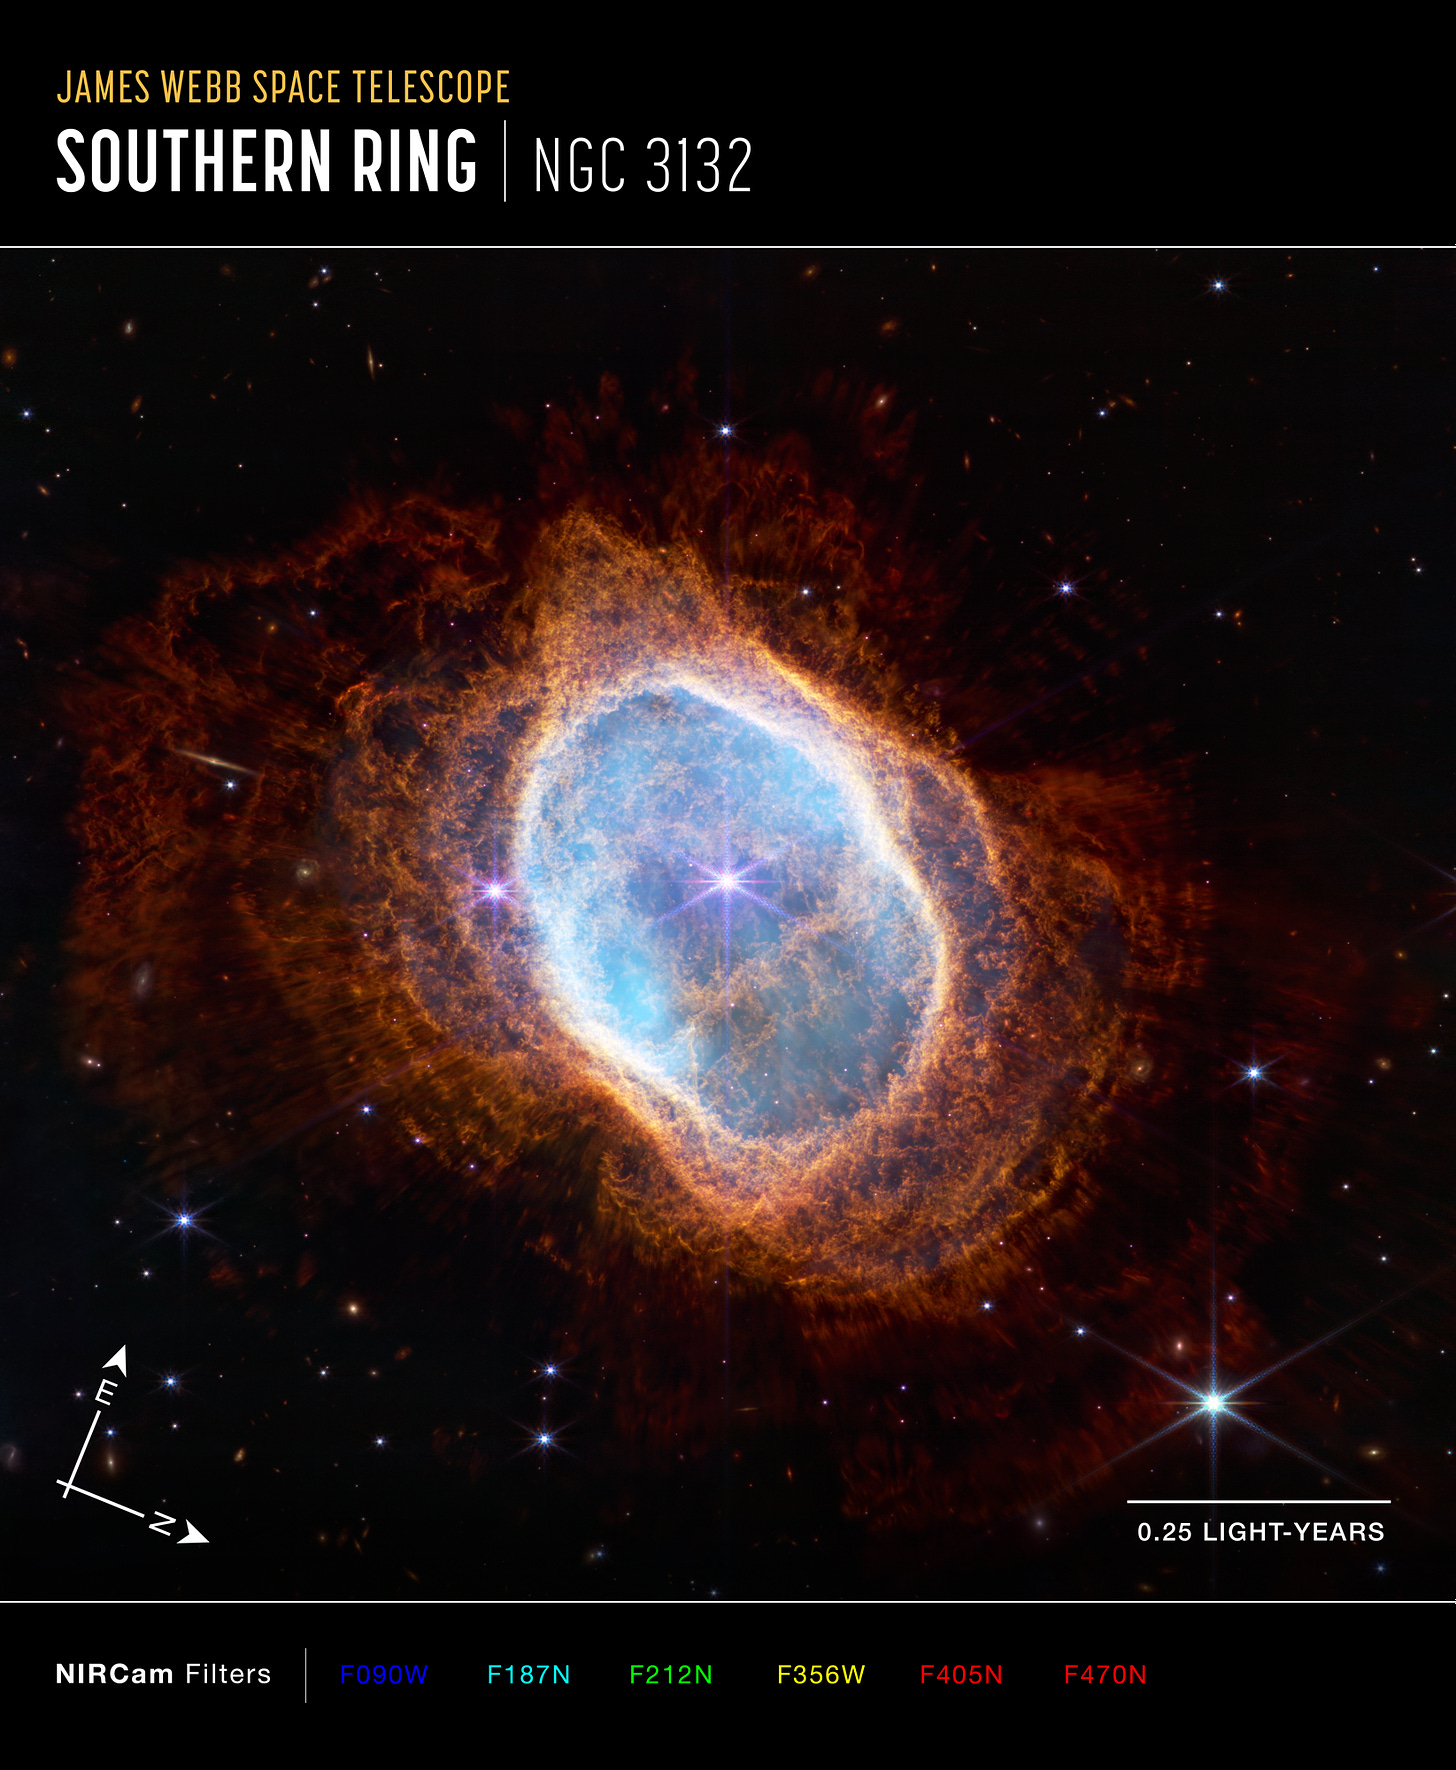 Colorful image of near-infrared light from a glowing cloud with a distorted ring-like shape, illuminated from within by a bright central star. The Southern Ring Nebula is a large, semi-transparent oval that is slightly angled from top left to bottom right. A bright white star appears at the center of this image. A large transparent teal oval surrounds the central star. Several red shells surround the teal oval, extending almost to the edges of the image. The shells become a deeper red with distance from the center. The bright central star has eight diffraction spikes. Behind the gaseous teal layers are deeper orange layers that are arranged like threads in a complex weaving. The red layers, which are wavy overall, look like they have very thin straight lines piercing through them, which are holes where light from a central star is traveling. The background of the image is black and speckled with tiny bright stars and distant galaxies.